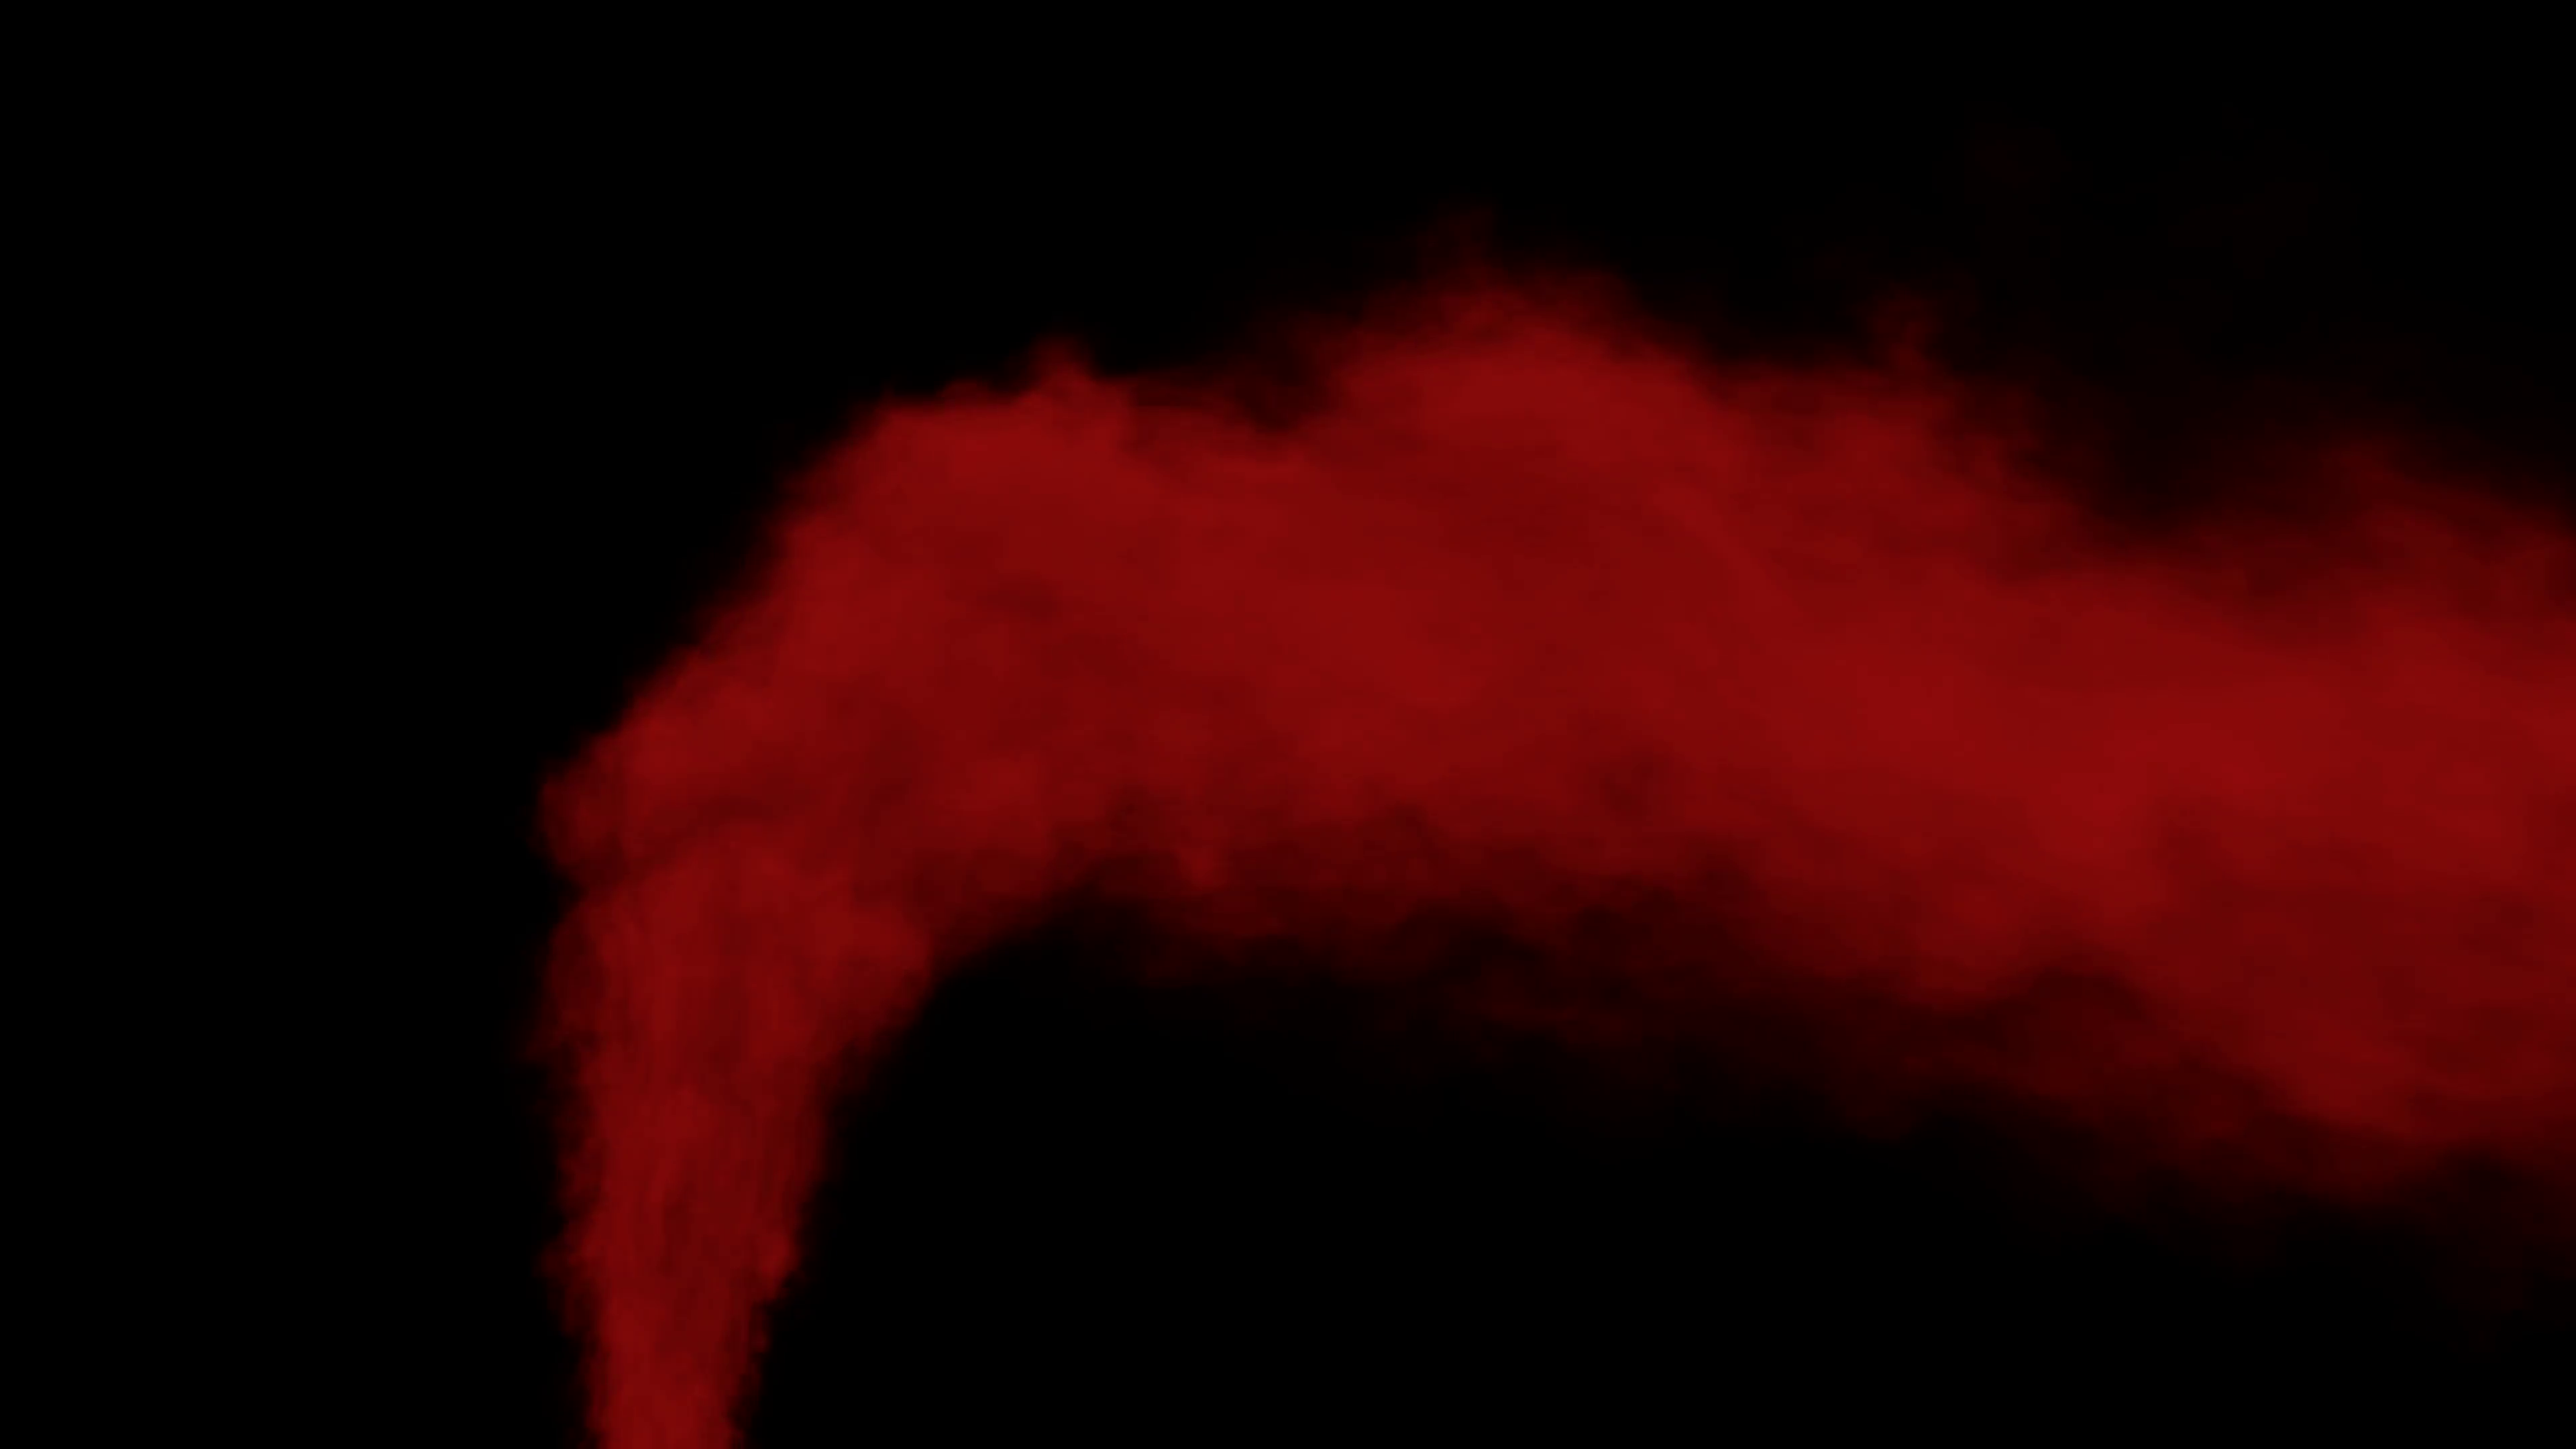 Animated stream of red smoke or toxic gas drifting to the right side ...